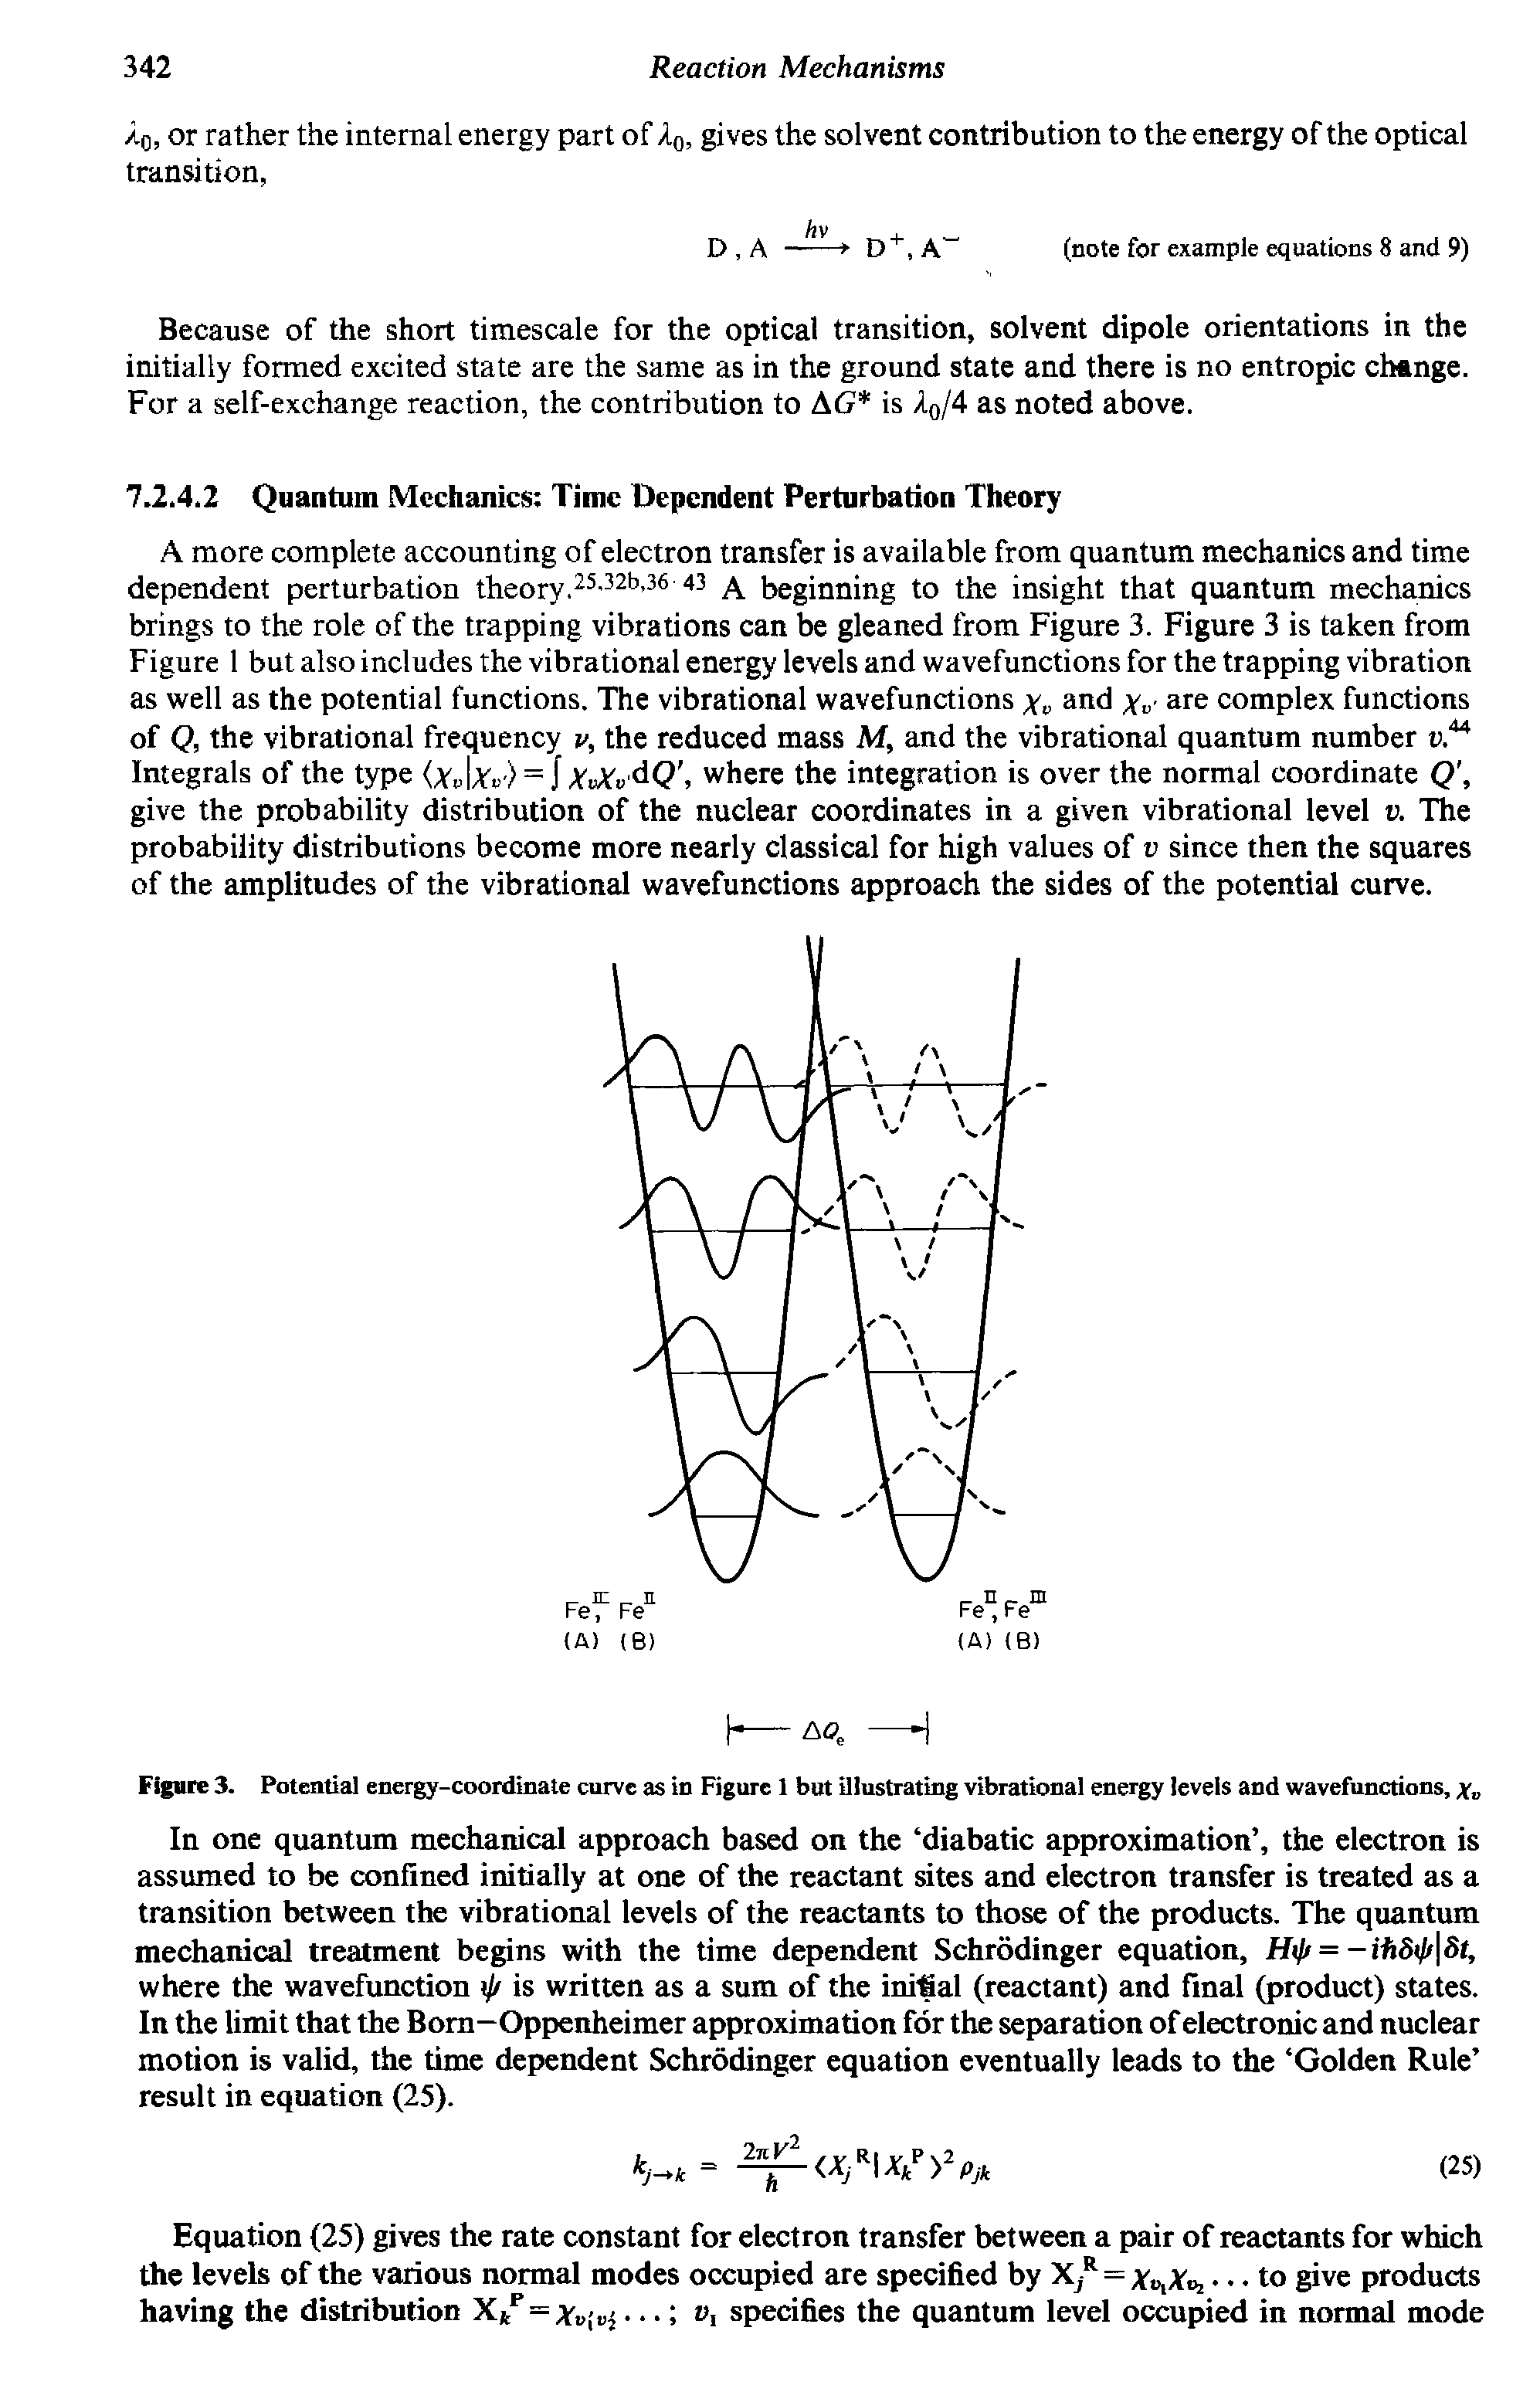 Figure 3. Potential energy-coordinate curve as in Figure 1 but illustrating vibrational energy levels and wavefunctions, xv...